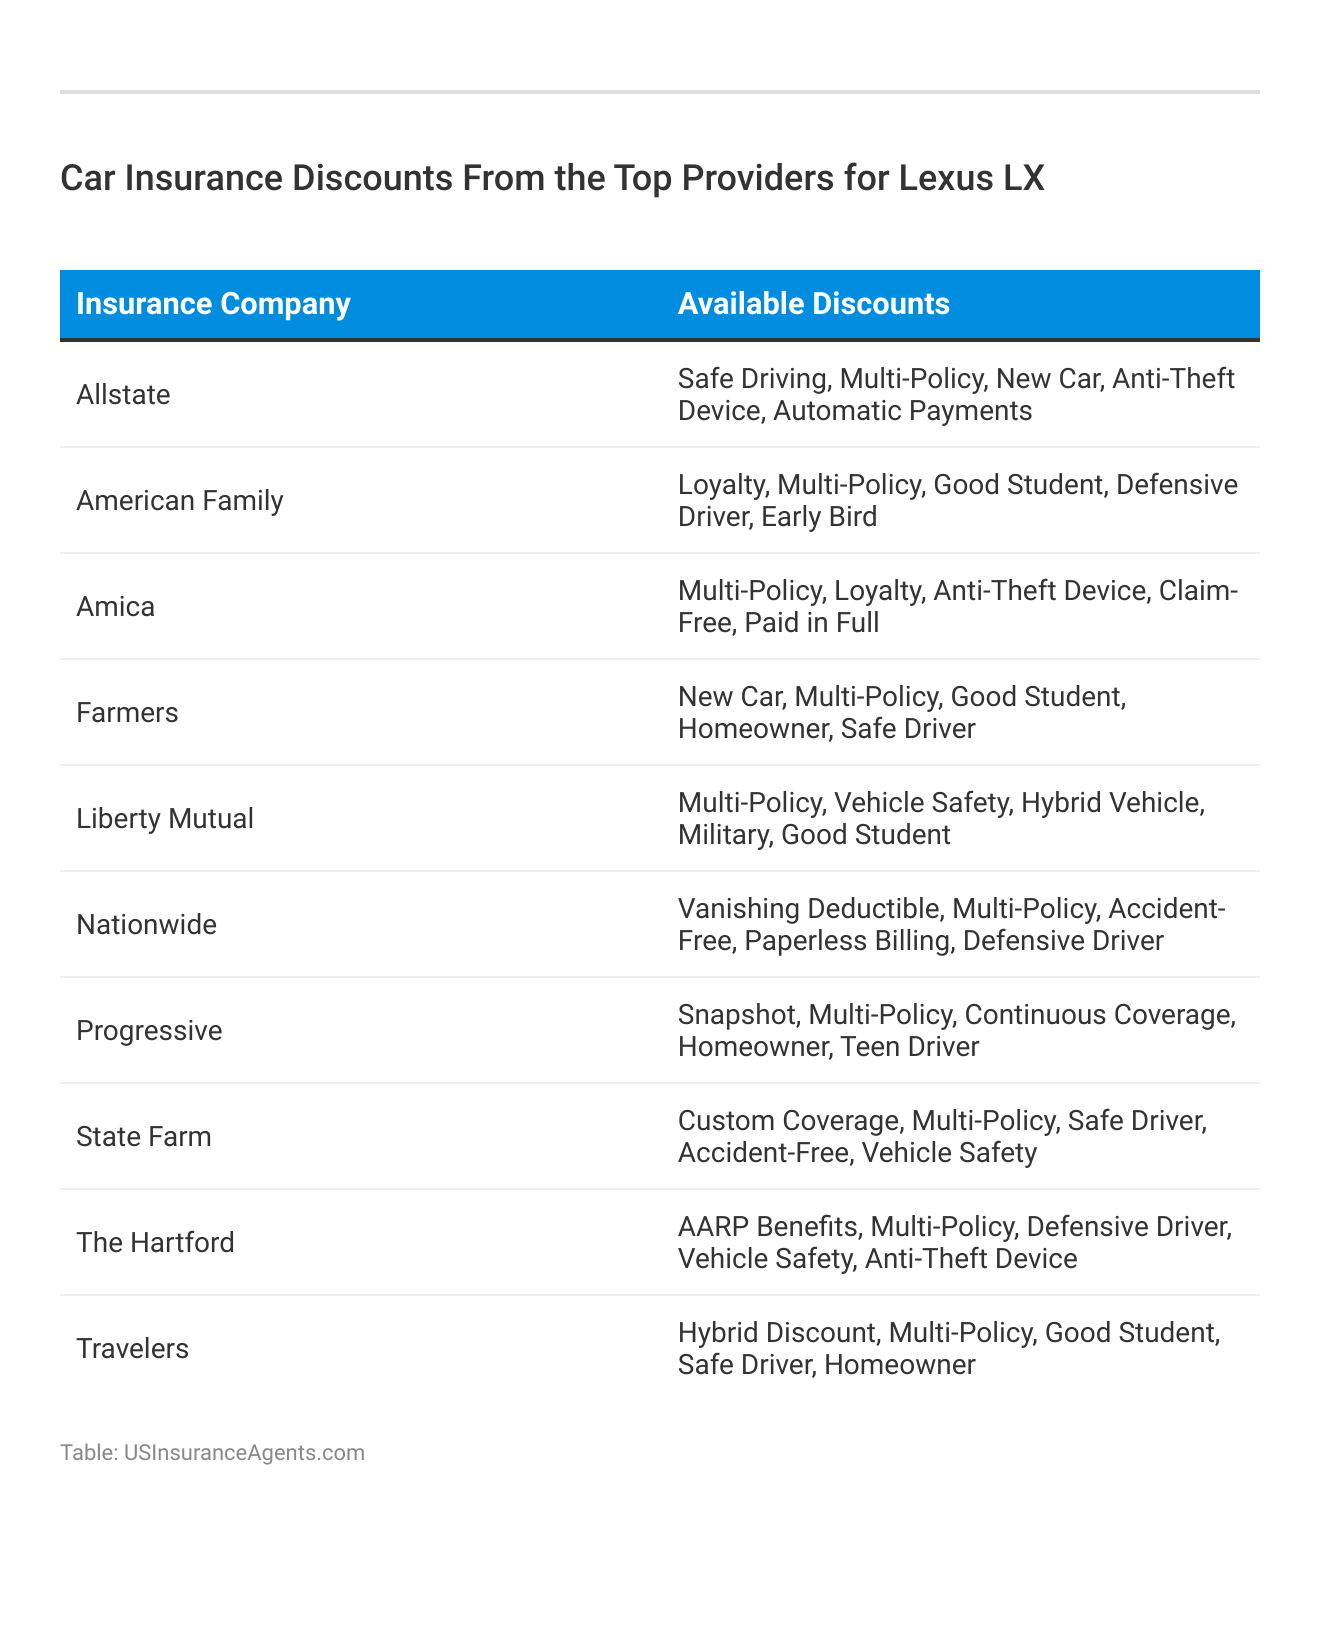 <h3>Car Insurance Discounts From the Top Providers for Lexus LX</h3>